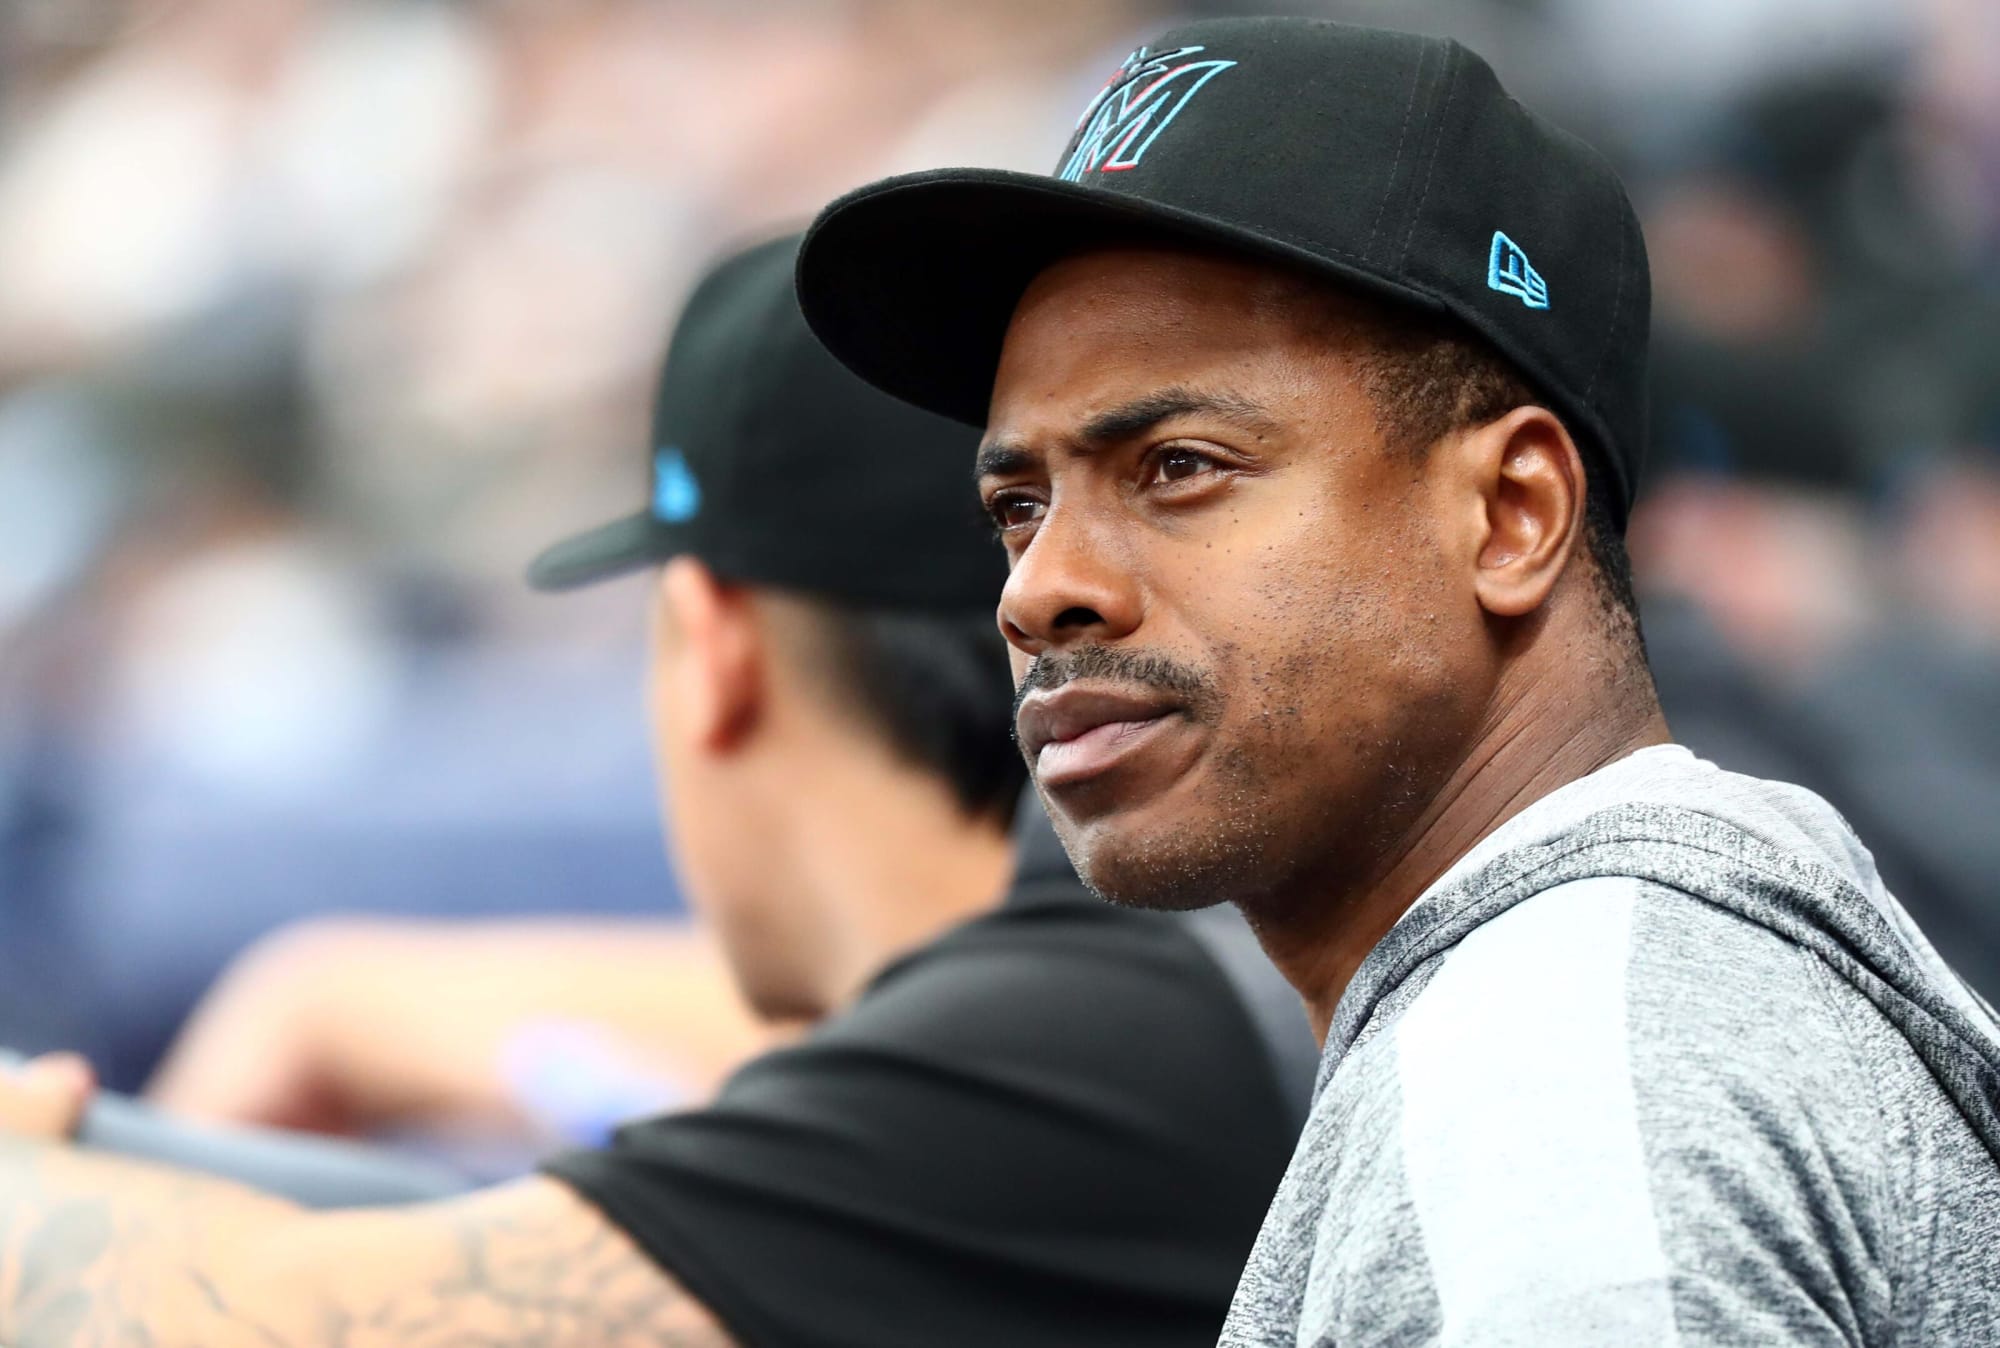 Curtis Granderson emerges as candidate for Mets' manager opening